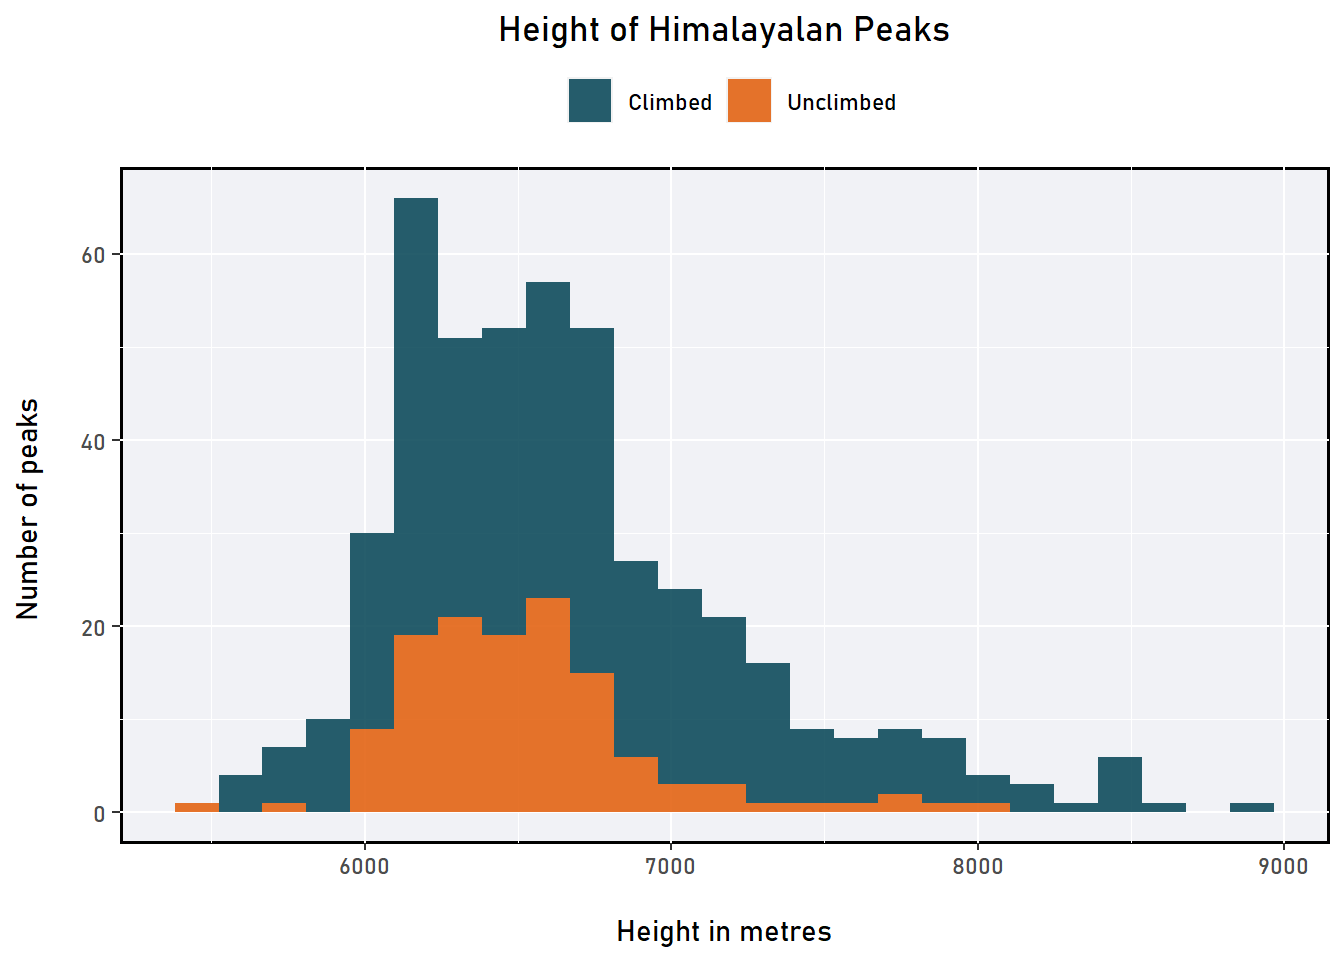 The histogram shows the distribution of heights of the peaks in Himalaya that have been climbed and yet to be climbed.It is seen that majority of the climbed peaks are between 6000-8000m high where as the unclimbed are around 6000-7000m high.